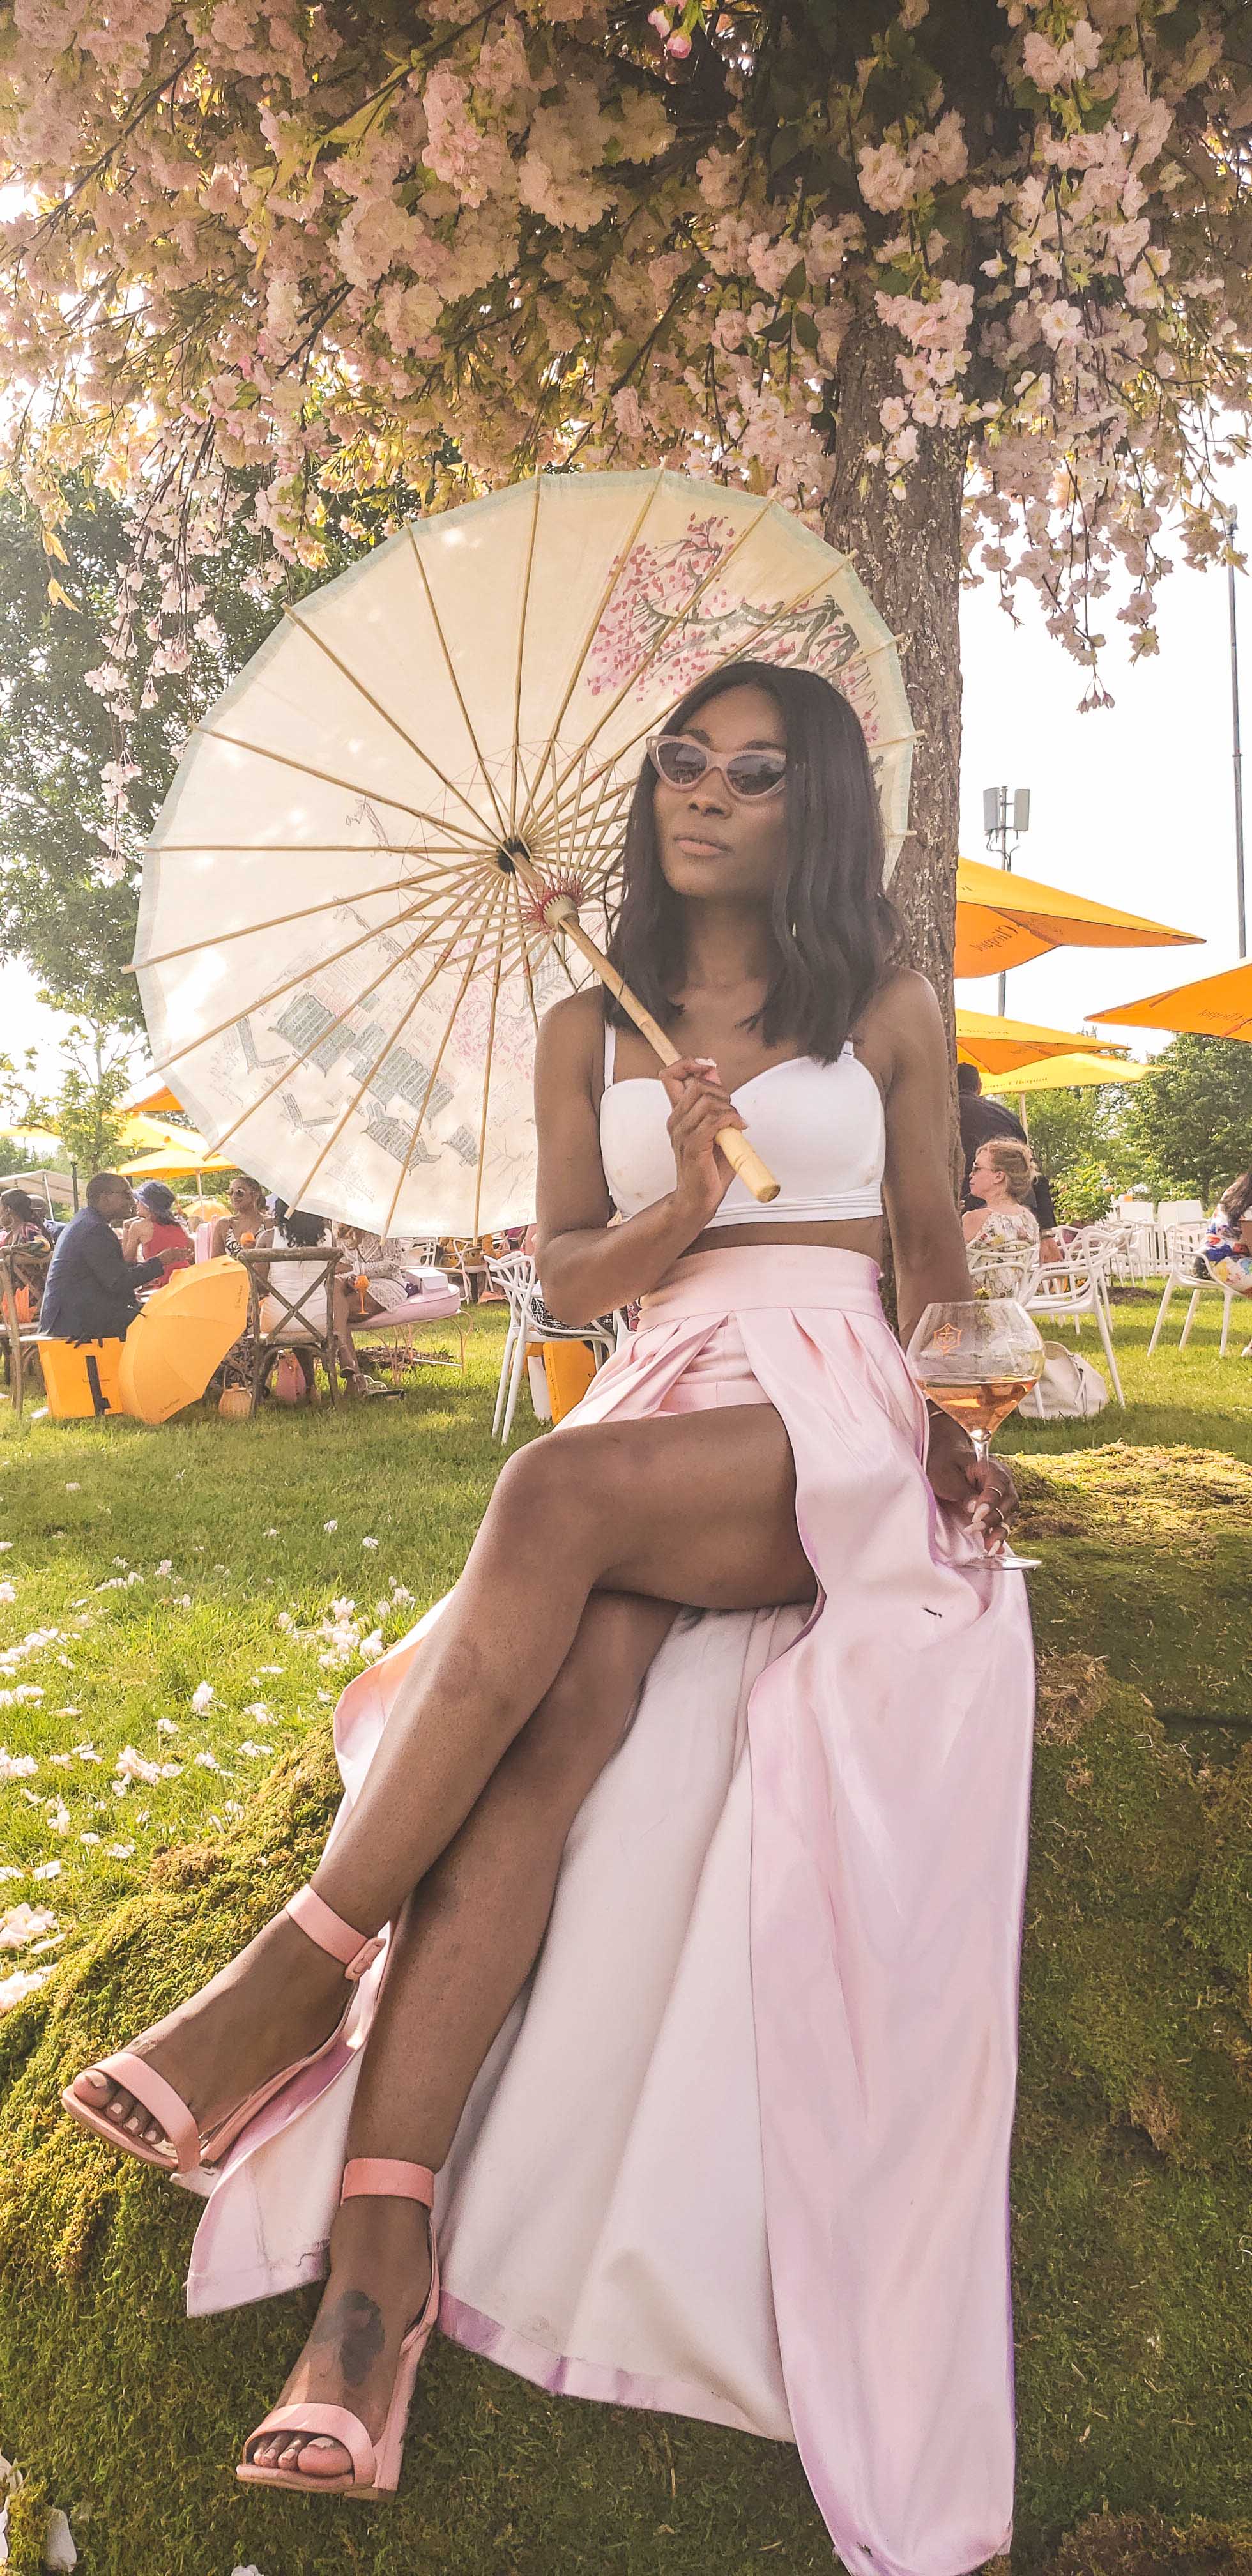 Street Style Was In Full Effect At The 11th Annual Veuve Clicquot Polo Classic
